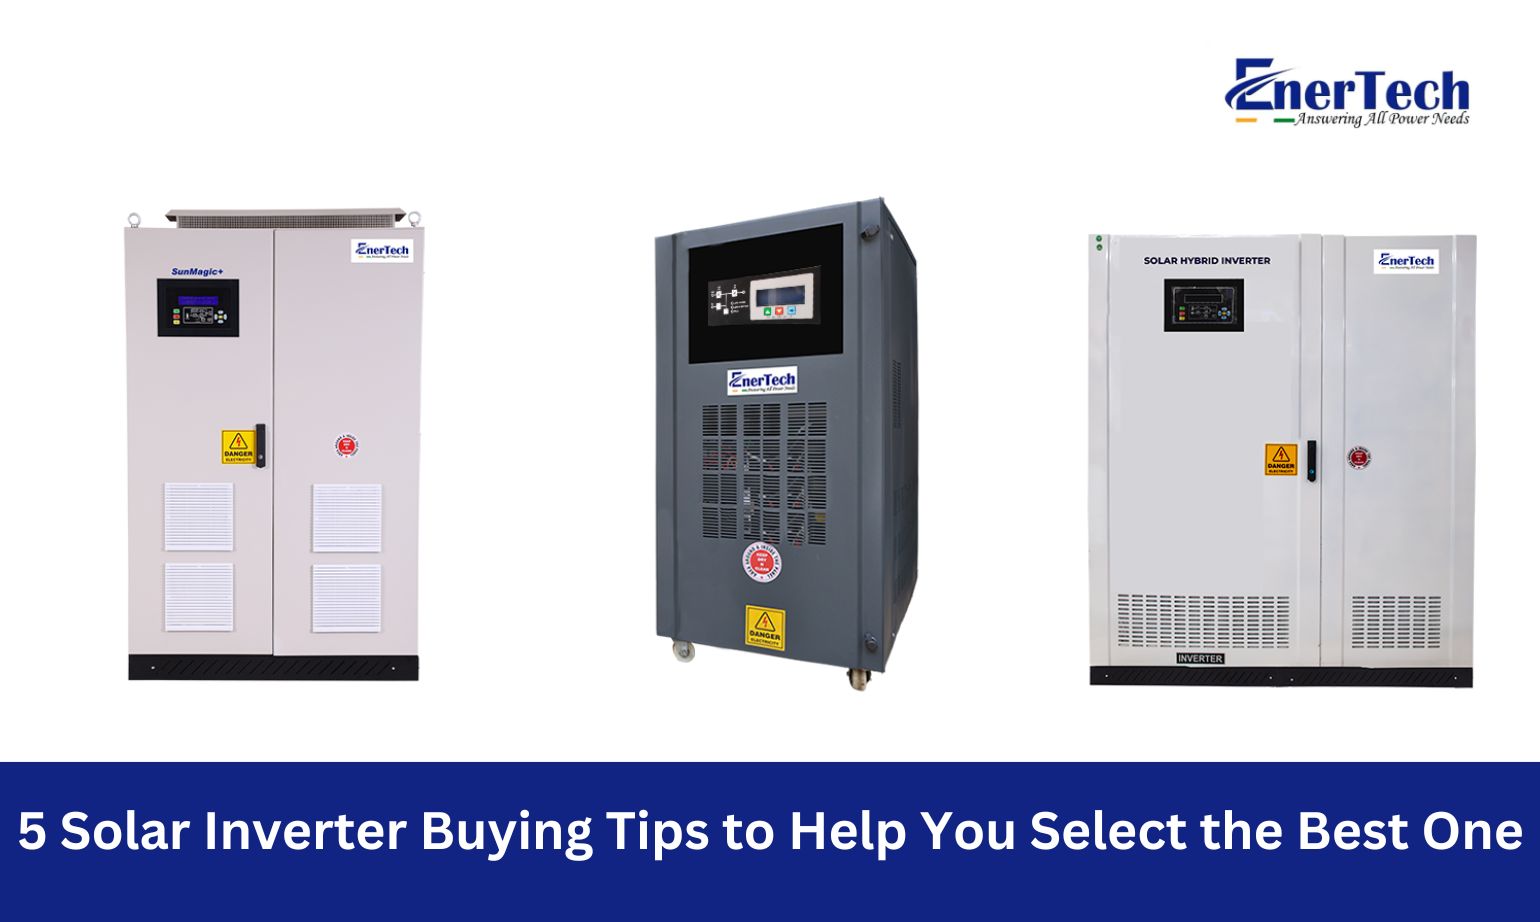 5 Solar Inverter Buying Tips to Help You Select the Best One